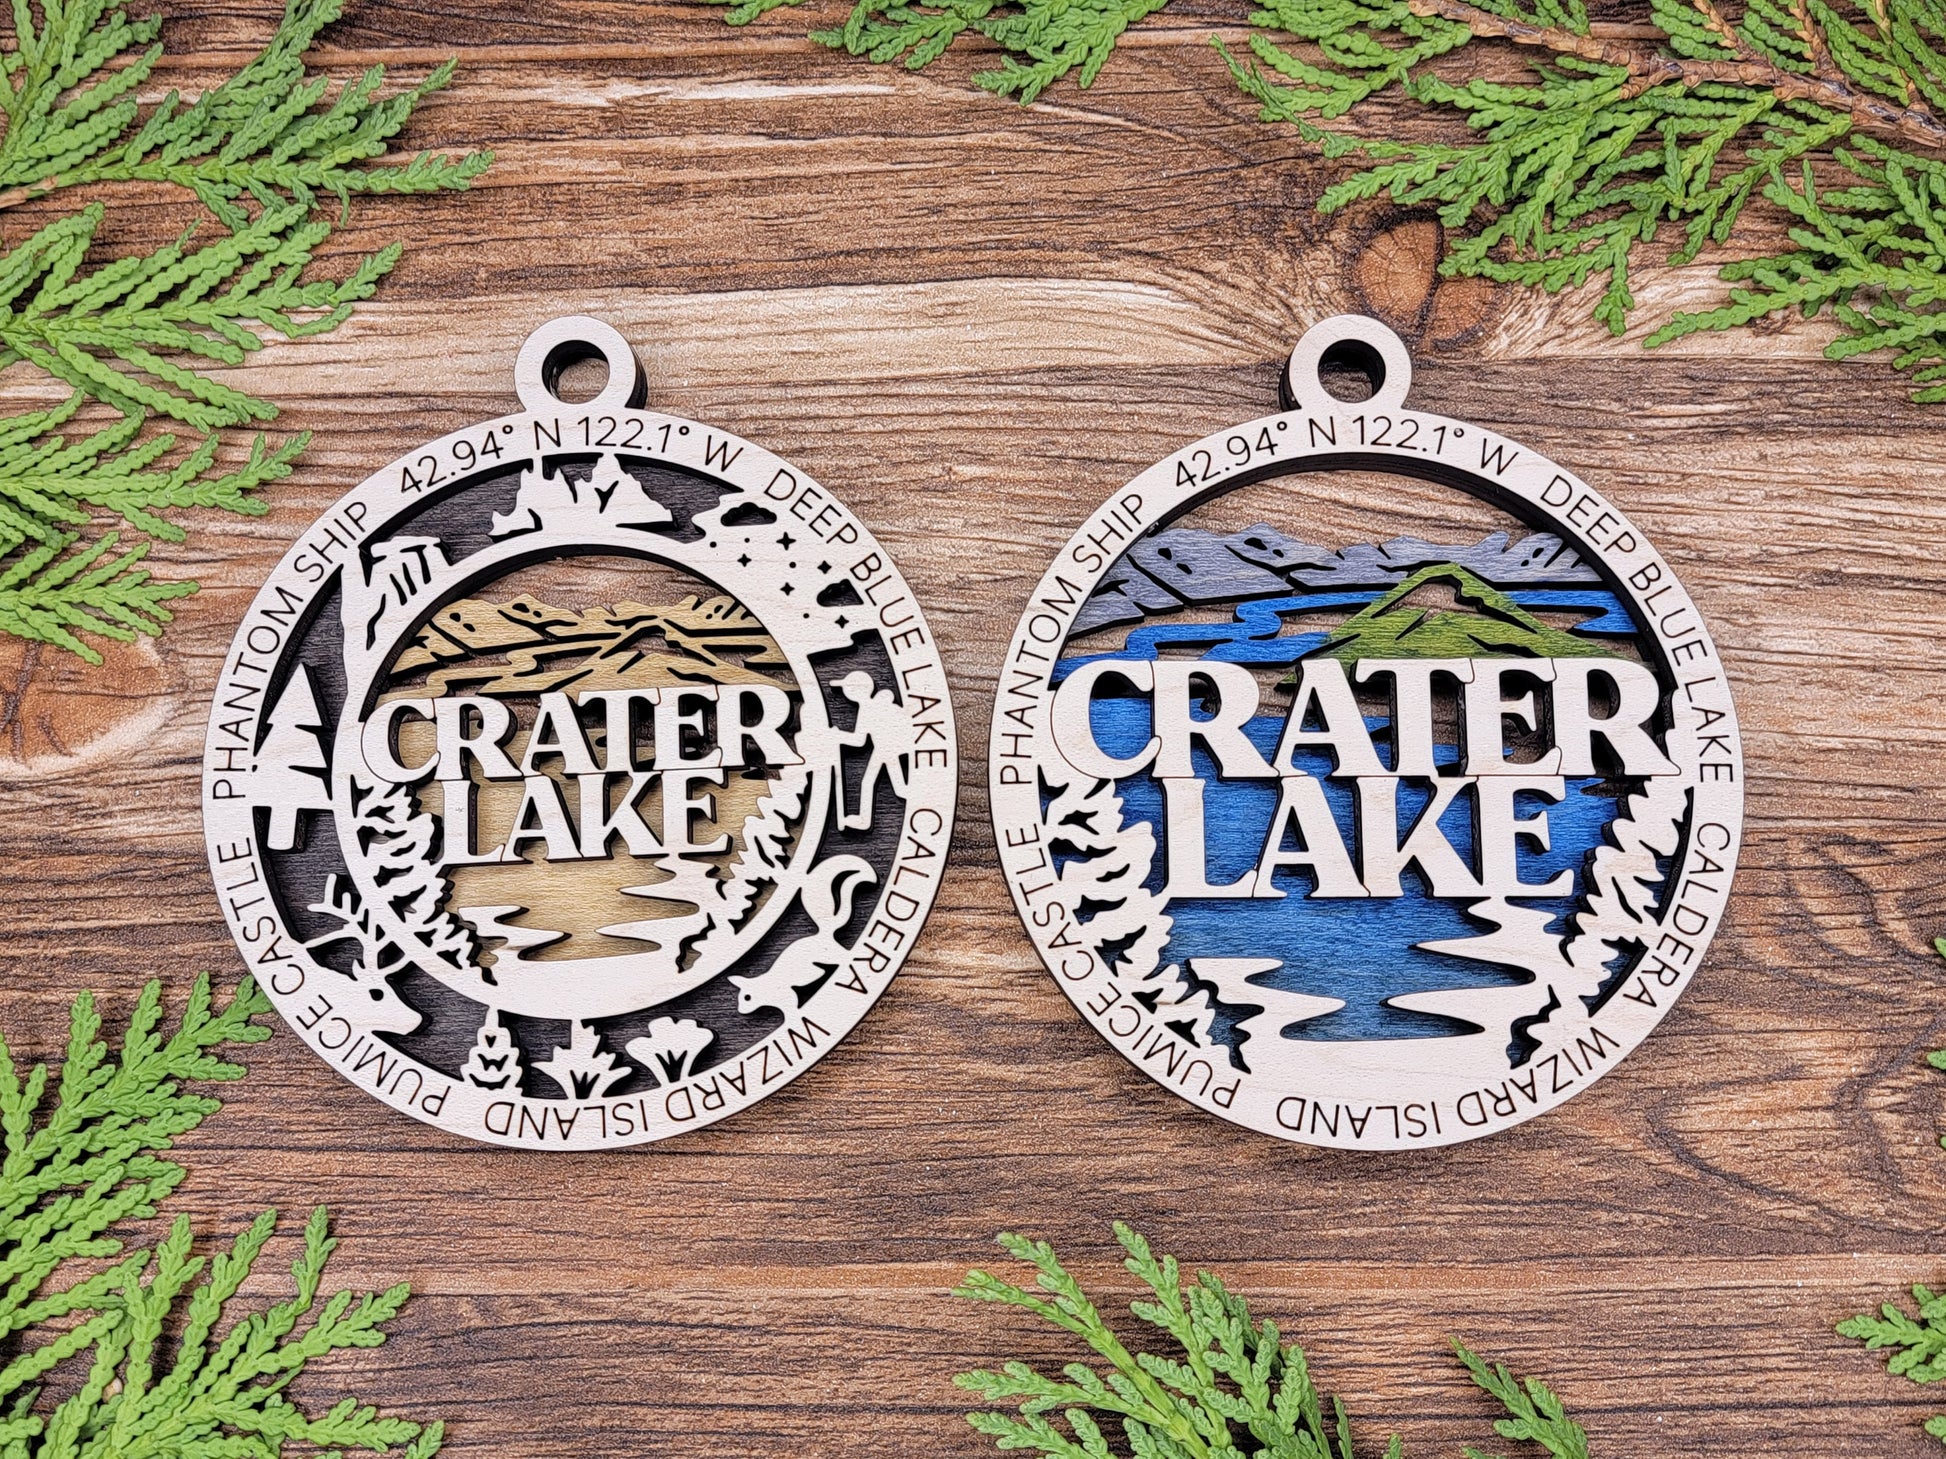 Crater Lake Park Ornament - Includes 2 Ornaments - Laser Design SVG, PDF, AI File Download - Tested On Glowforge and LightBurn